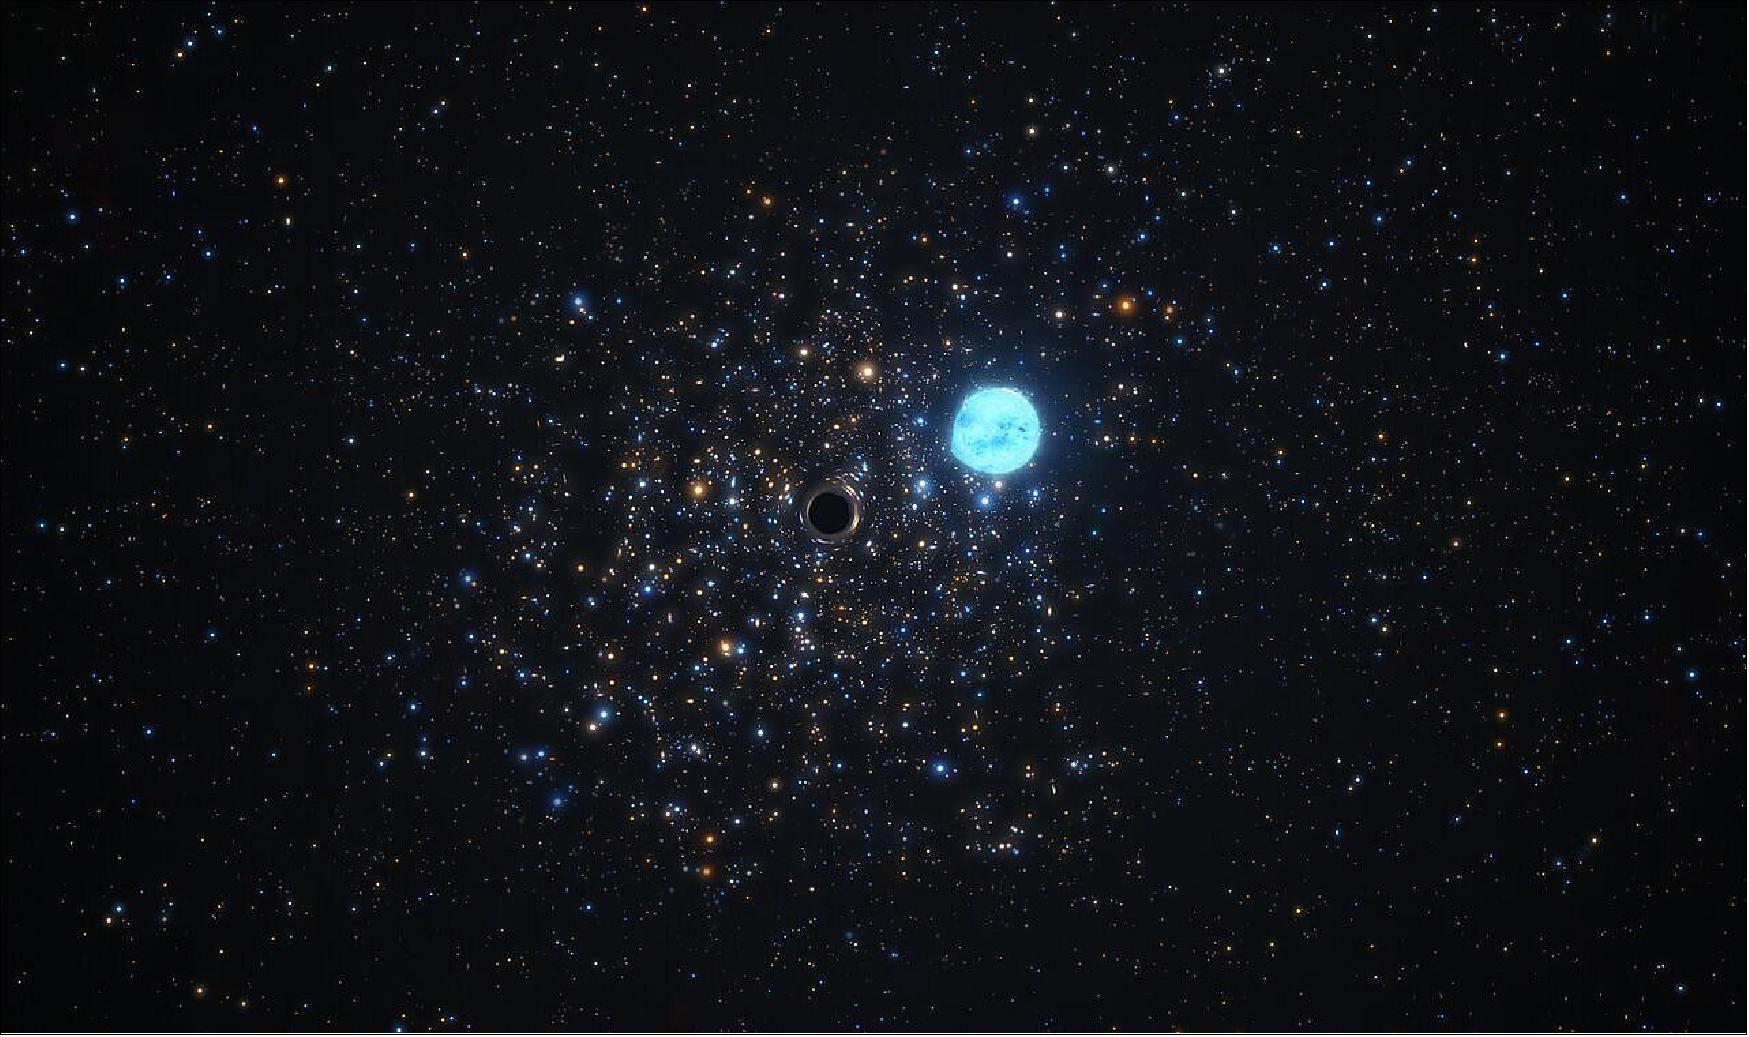 Figure 14: This artist’s impression shows a compact black hole 11 times as massive as the Sun and the five-solar-mass star orbiting it. The two objects are located in NGC 1850, a cluster of thousands of stars roughly 160,000 light-years away in the Large Magellanic Cloud, a Milky Way neighbor. The distortion of the star’s shape is due to the strong gravitational force exerted by the black hole. - Not only does the black hole’s gravitational force distort the shape of the star, but it also influences its orbit. By looking at these subtle orbital effects, a team of astronomers were able to infer the presence of the black hole, making it the first small black hole outside of our galaxy to be found this way. For this discovery, the team used the Multi Unit Spectroscopic Explorer (MUSE) instrument at ESO’s VLT (Very Large Telescope) in Chile (image credit: ESO, M. Kornmesser)